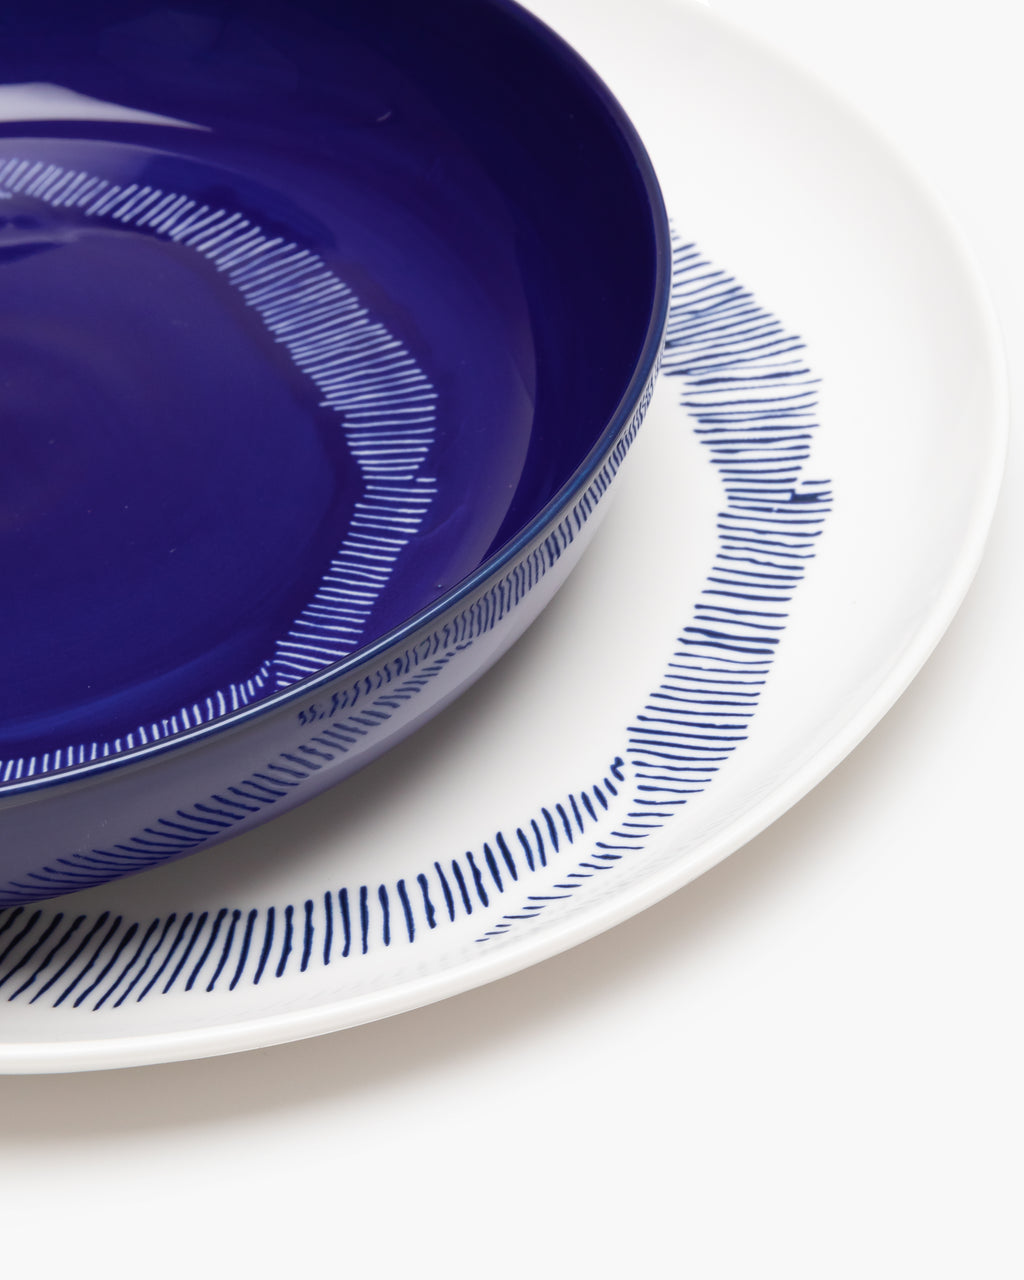 Full Set 24 pieces - Feast tableware by Ottolenghi - blue